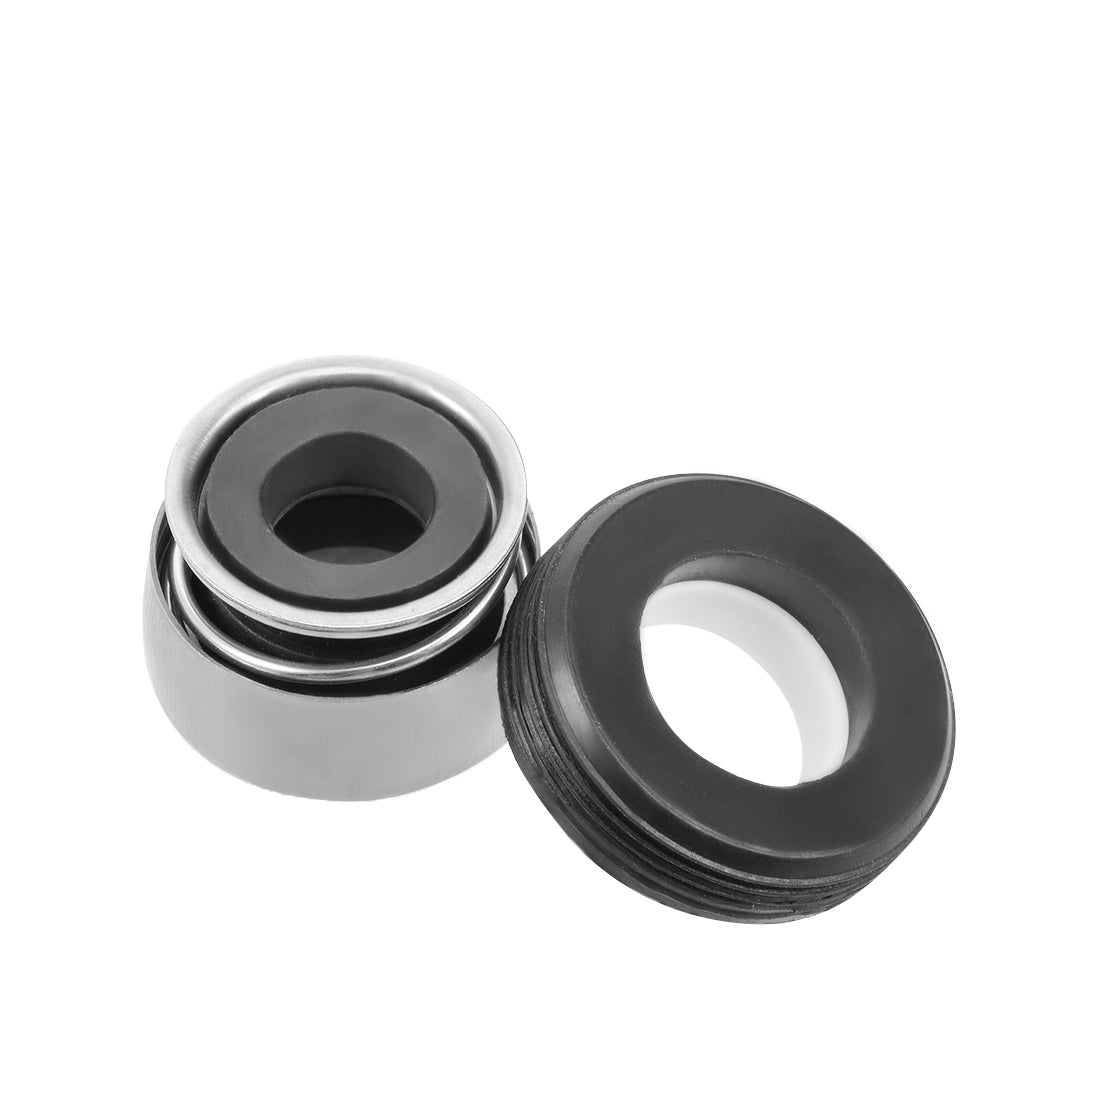 uxcell Uxcell Mechanical Shaft Seal Replacement for Pool Spa Pump 301-10 Model